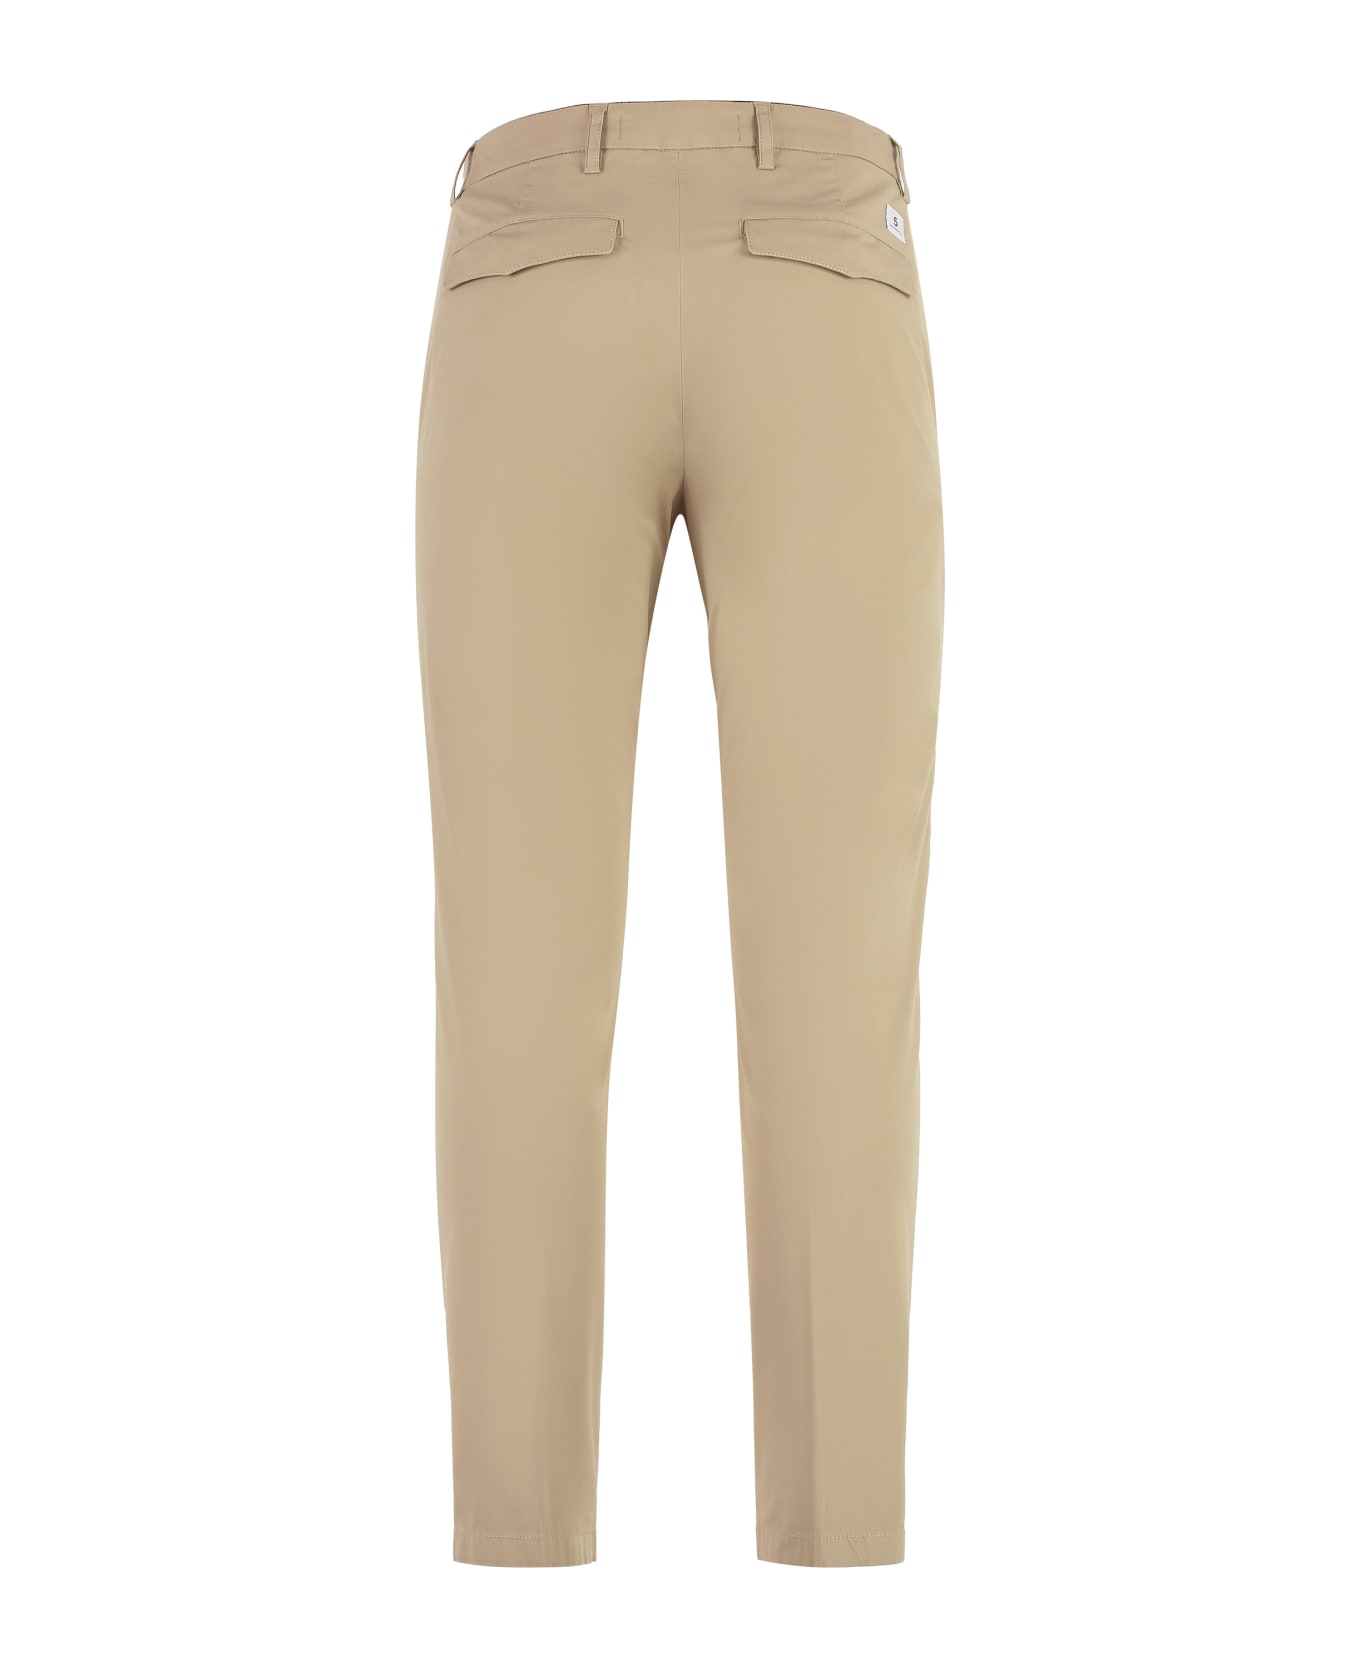 Department Five Prince Chino Pants - Sand